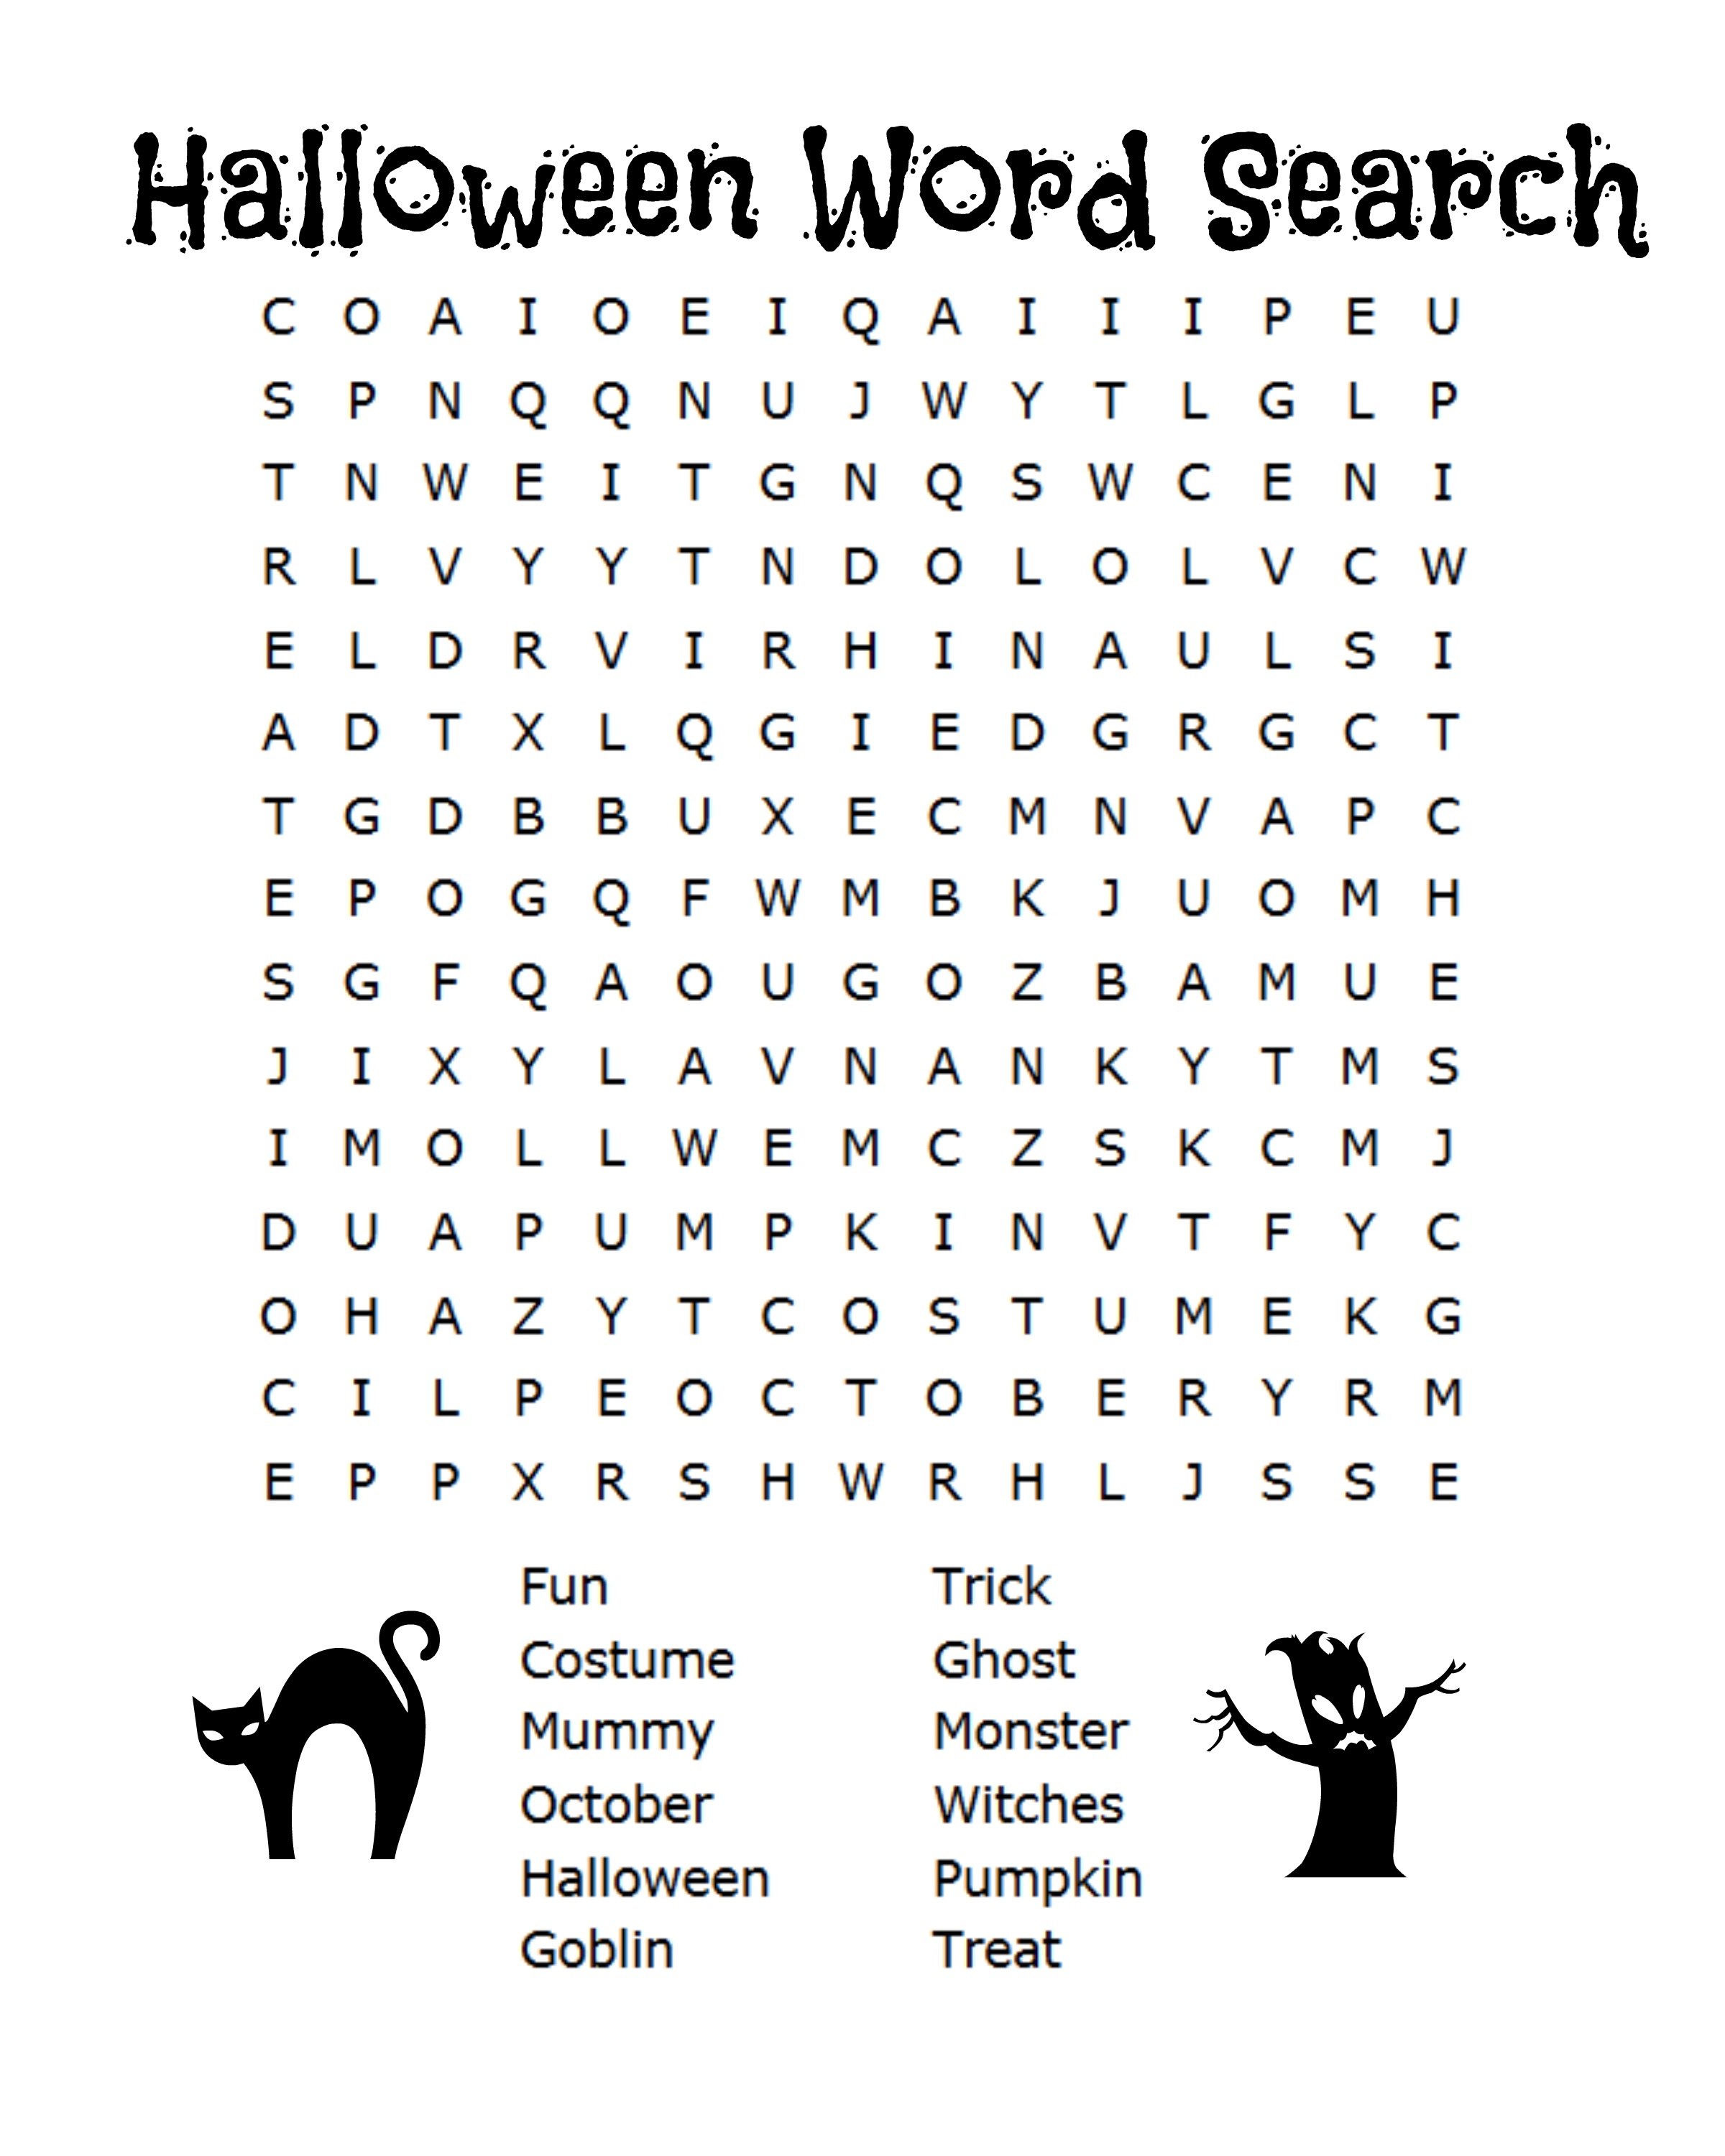 26 Spooky Halloween Word Searches | Kittybabylove - Free Printable Halloween Puzzles